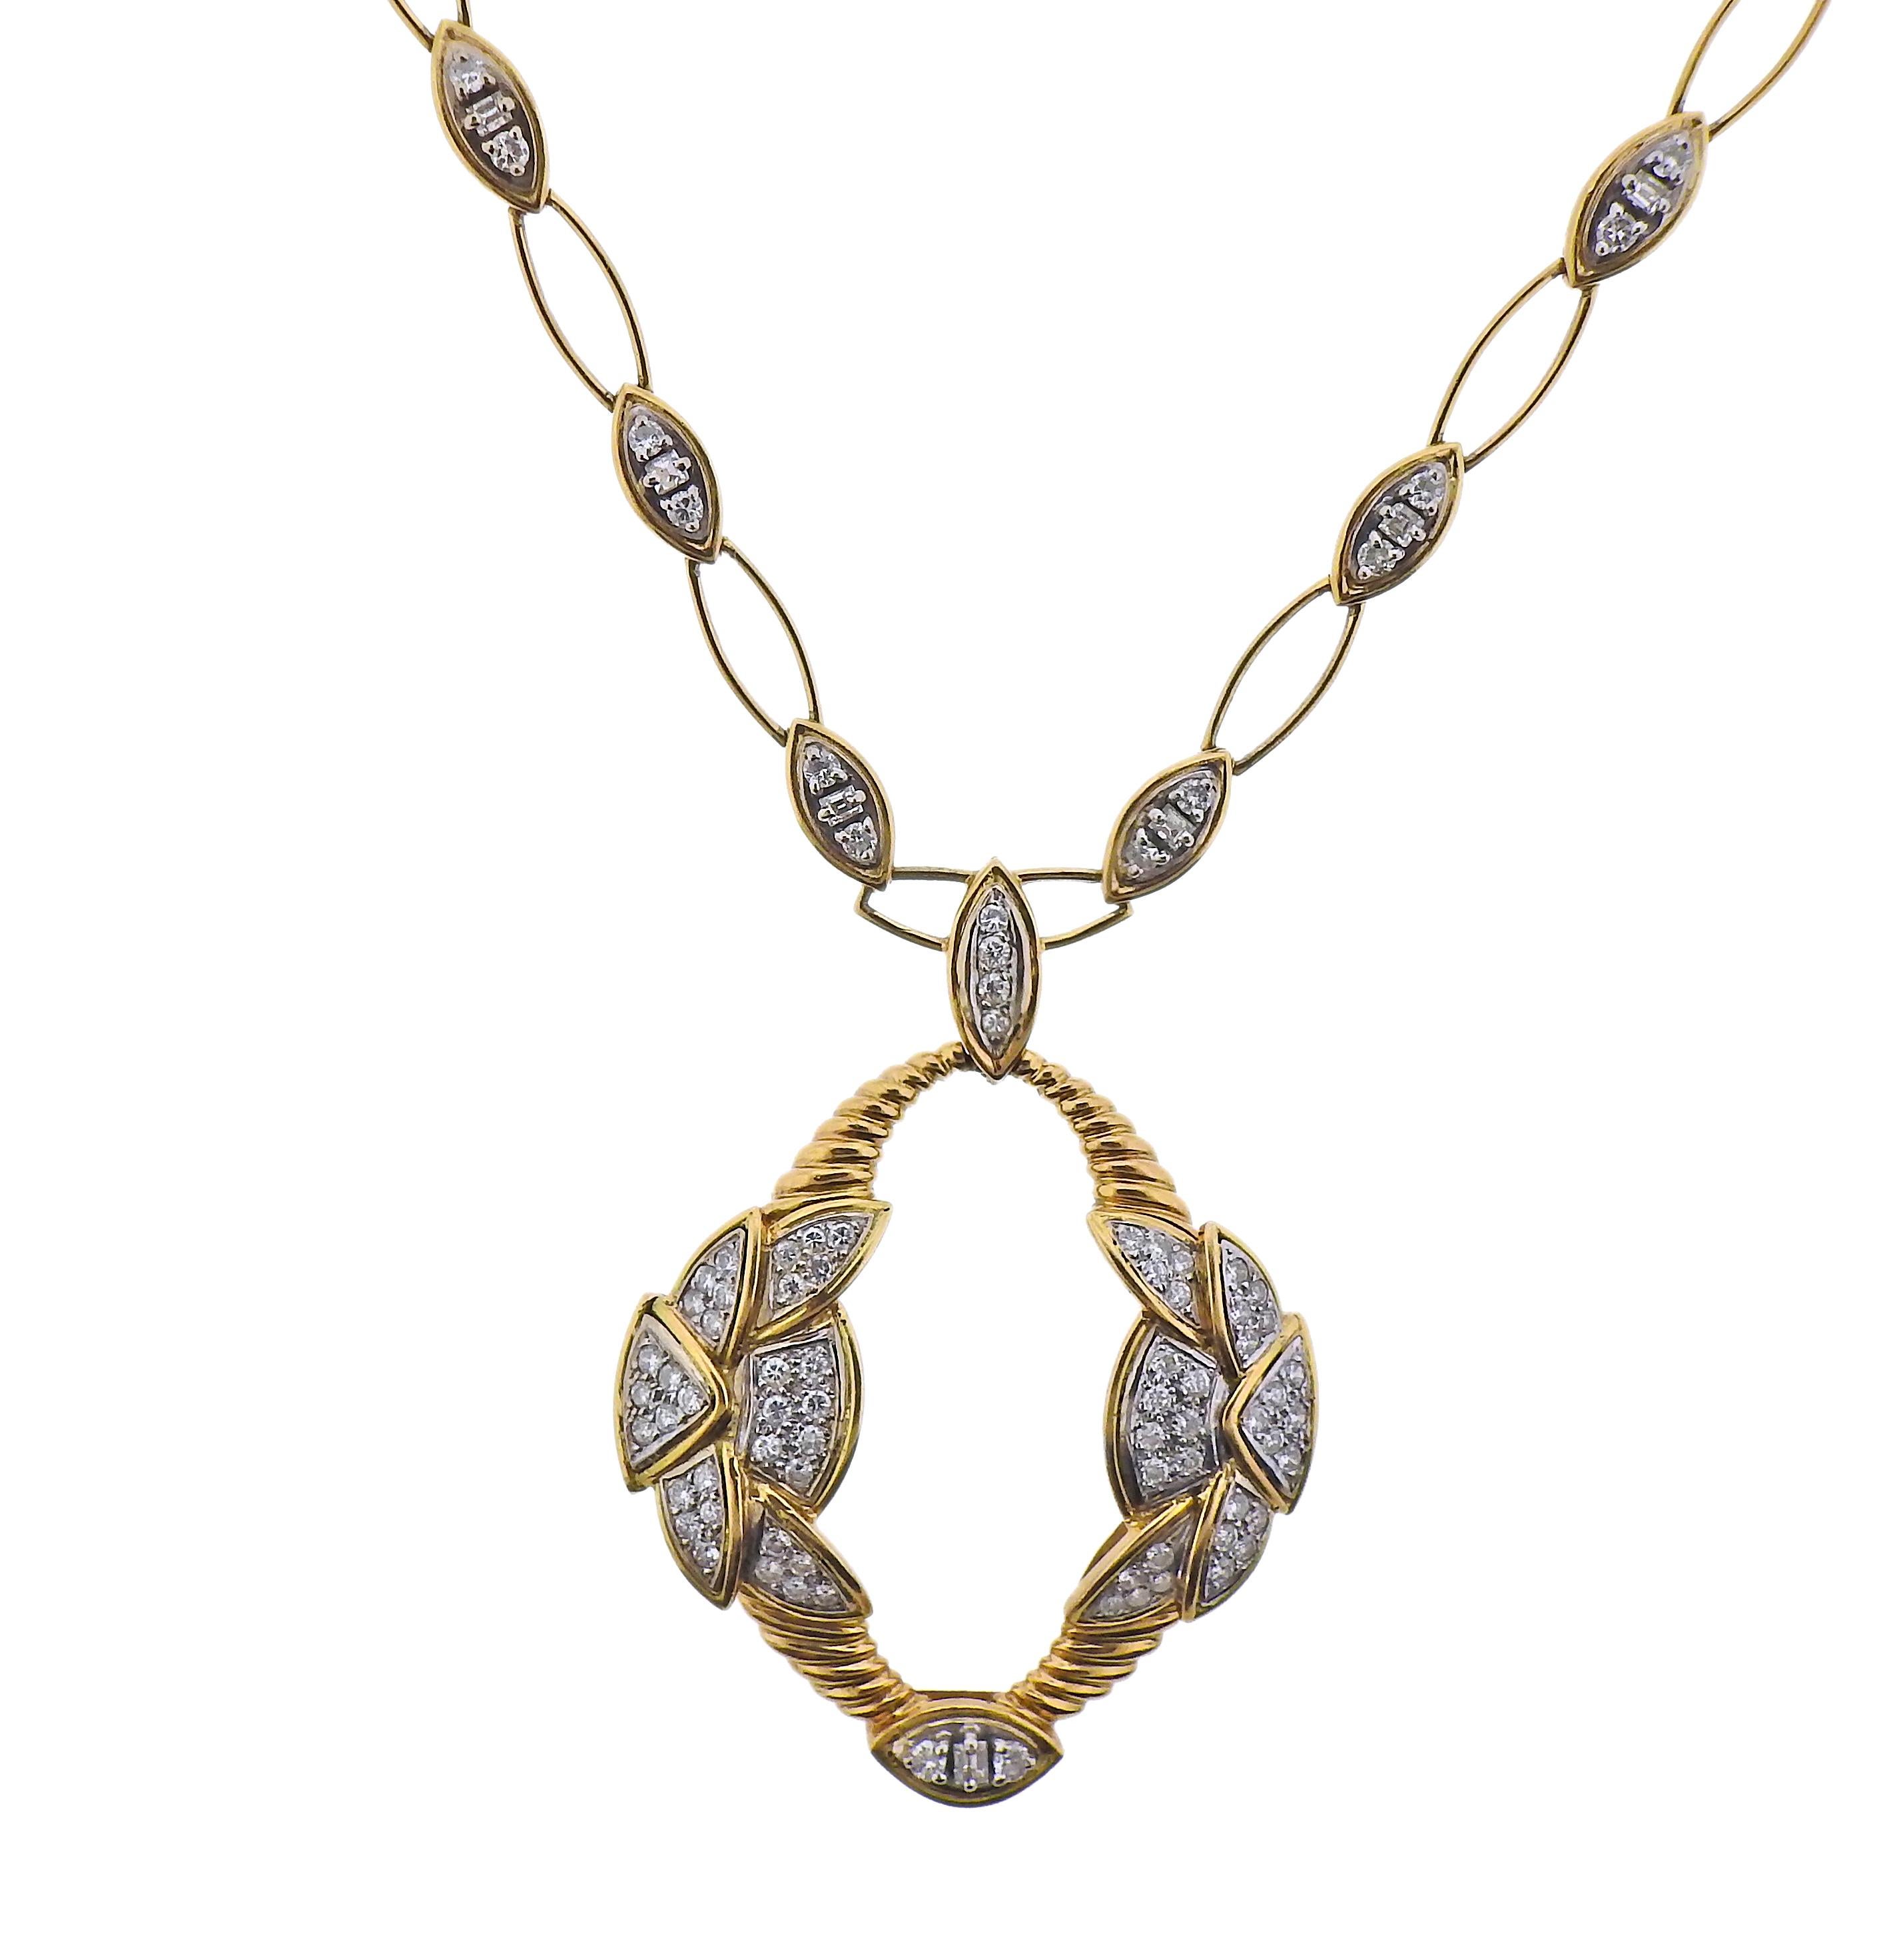 French made 18k gold link necklace with pendant. Set with approx. 5.00ctw in diamonds. Necklace is 24.5